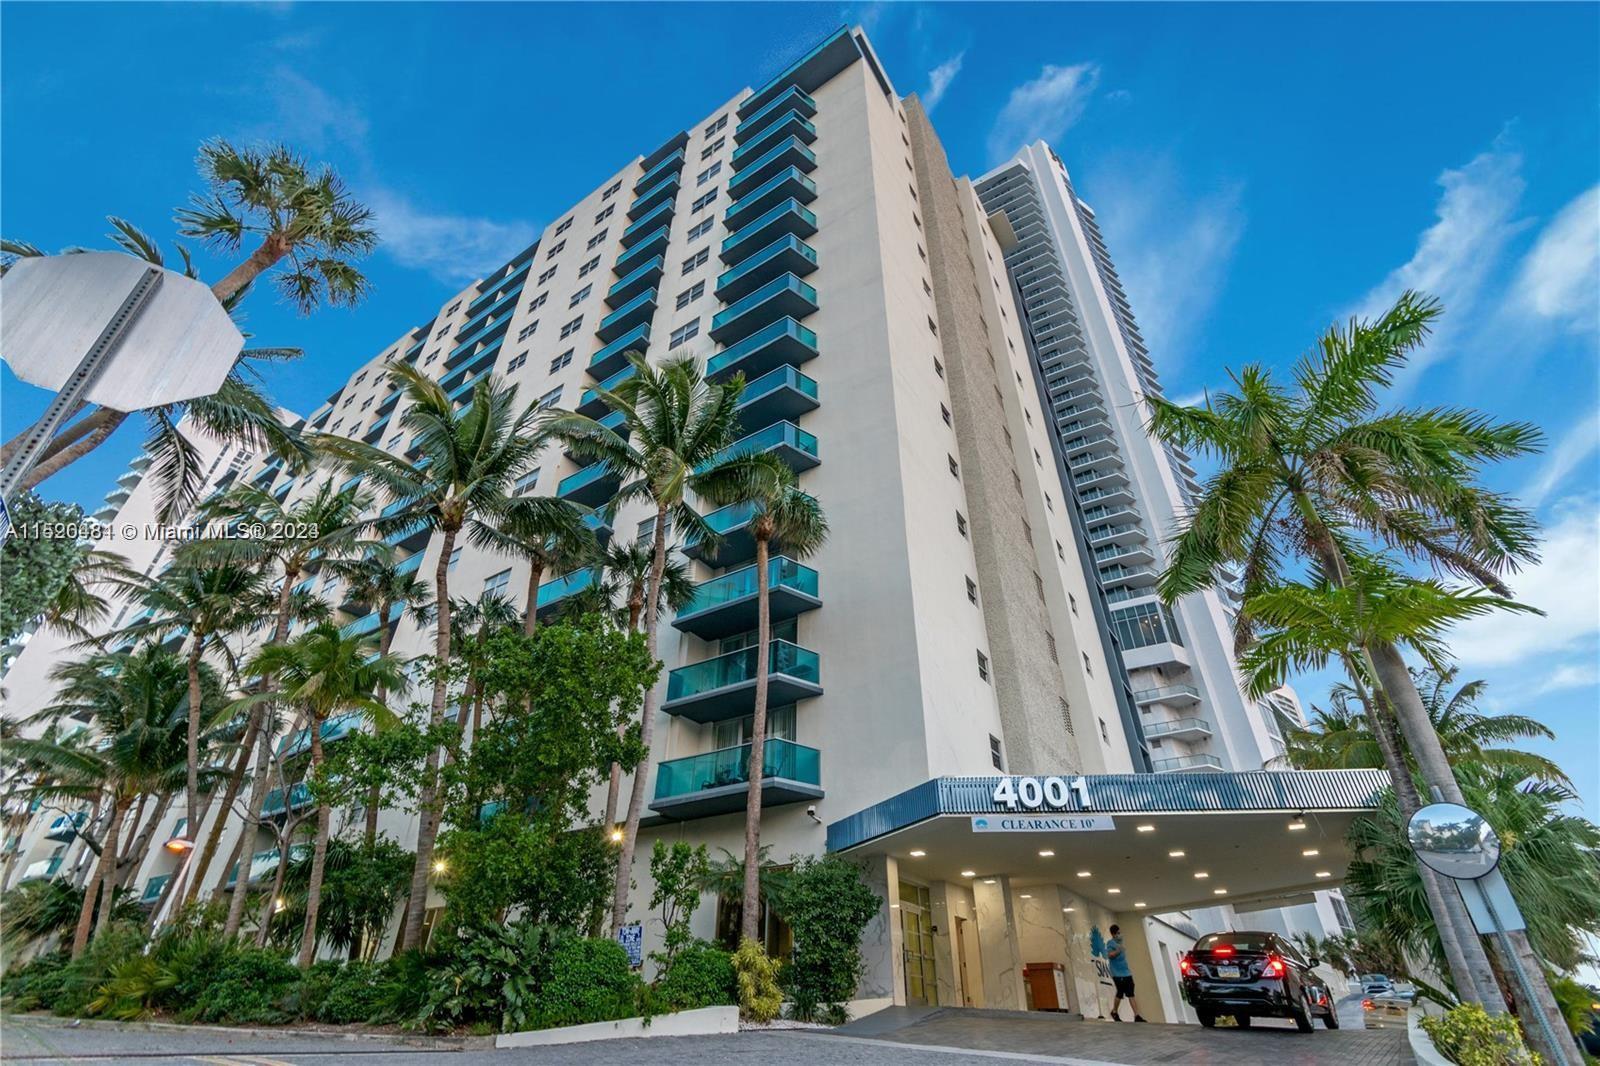 Photo of 4001 S Ocean Dr #11A in Hollywood, FL